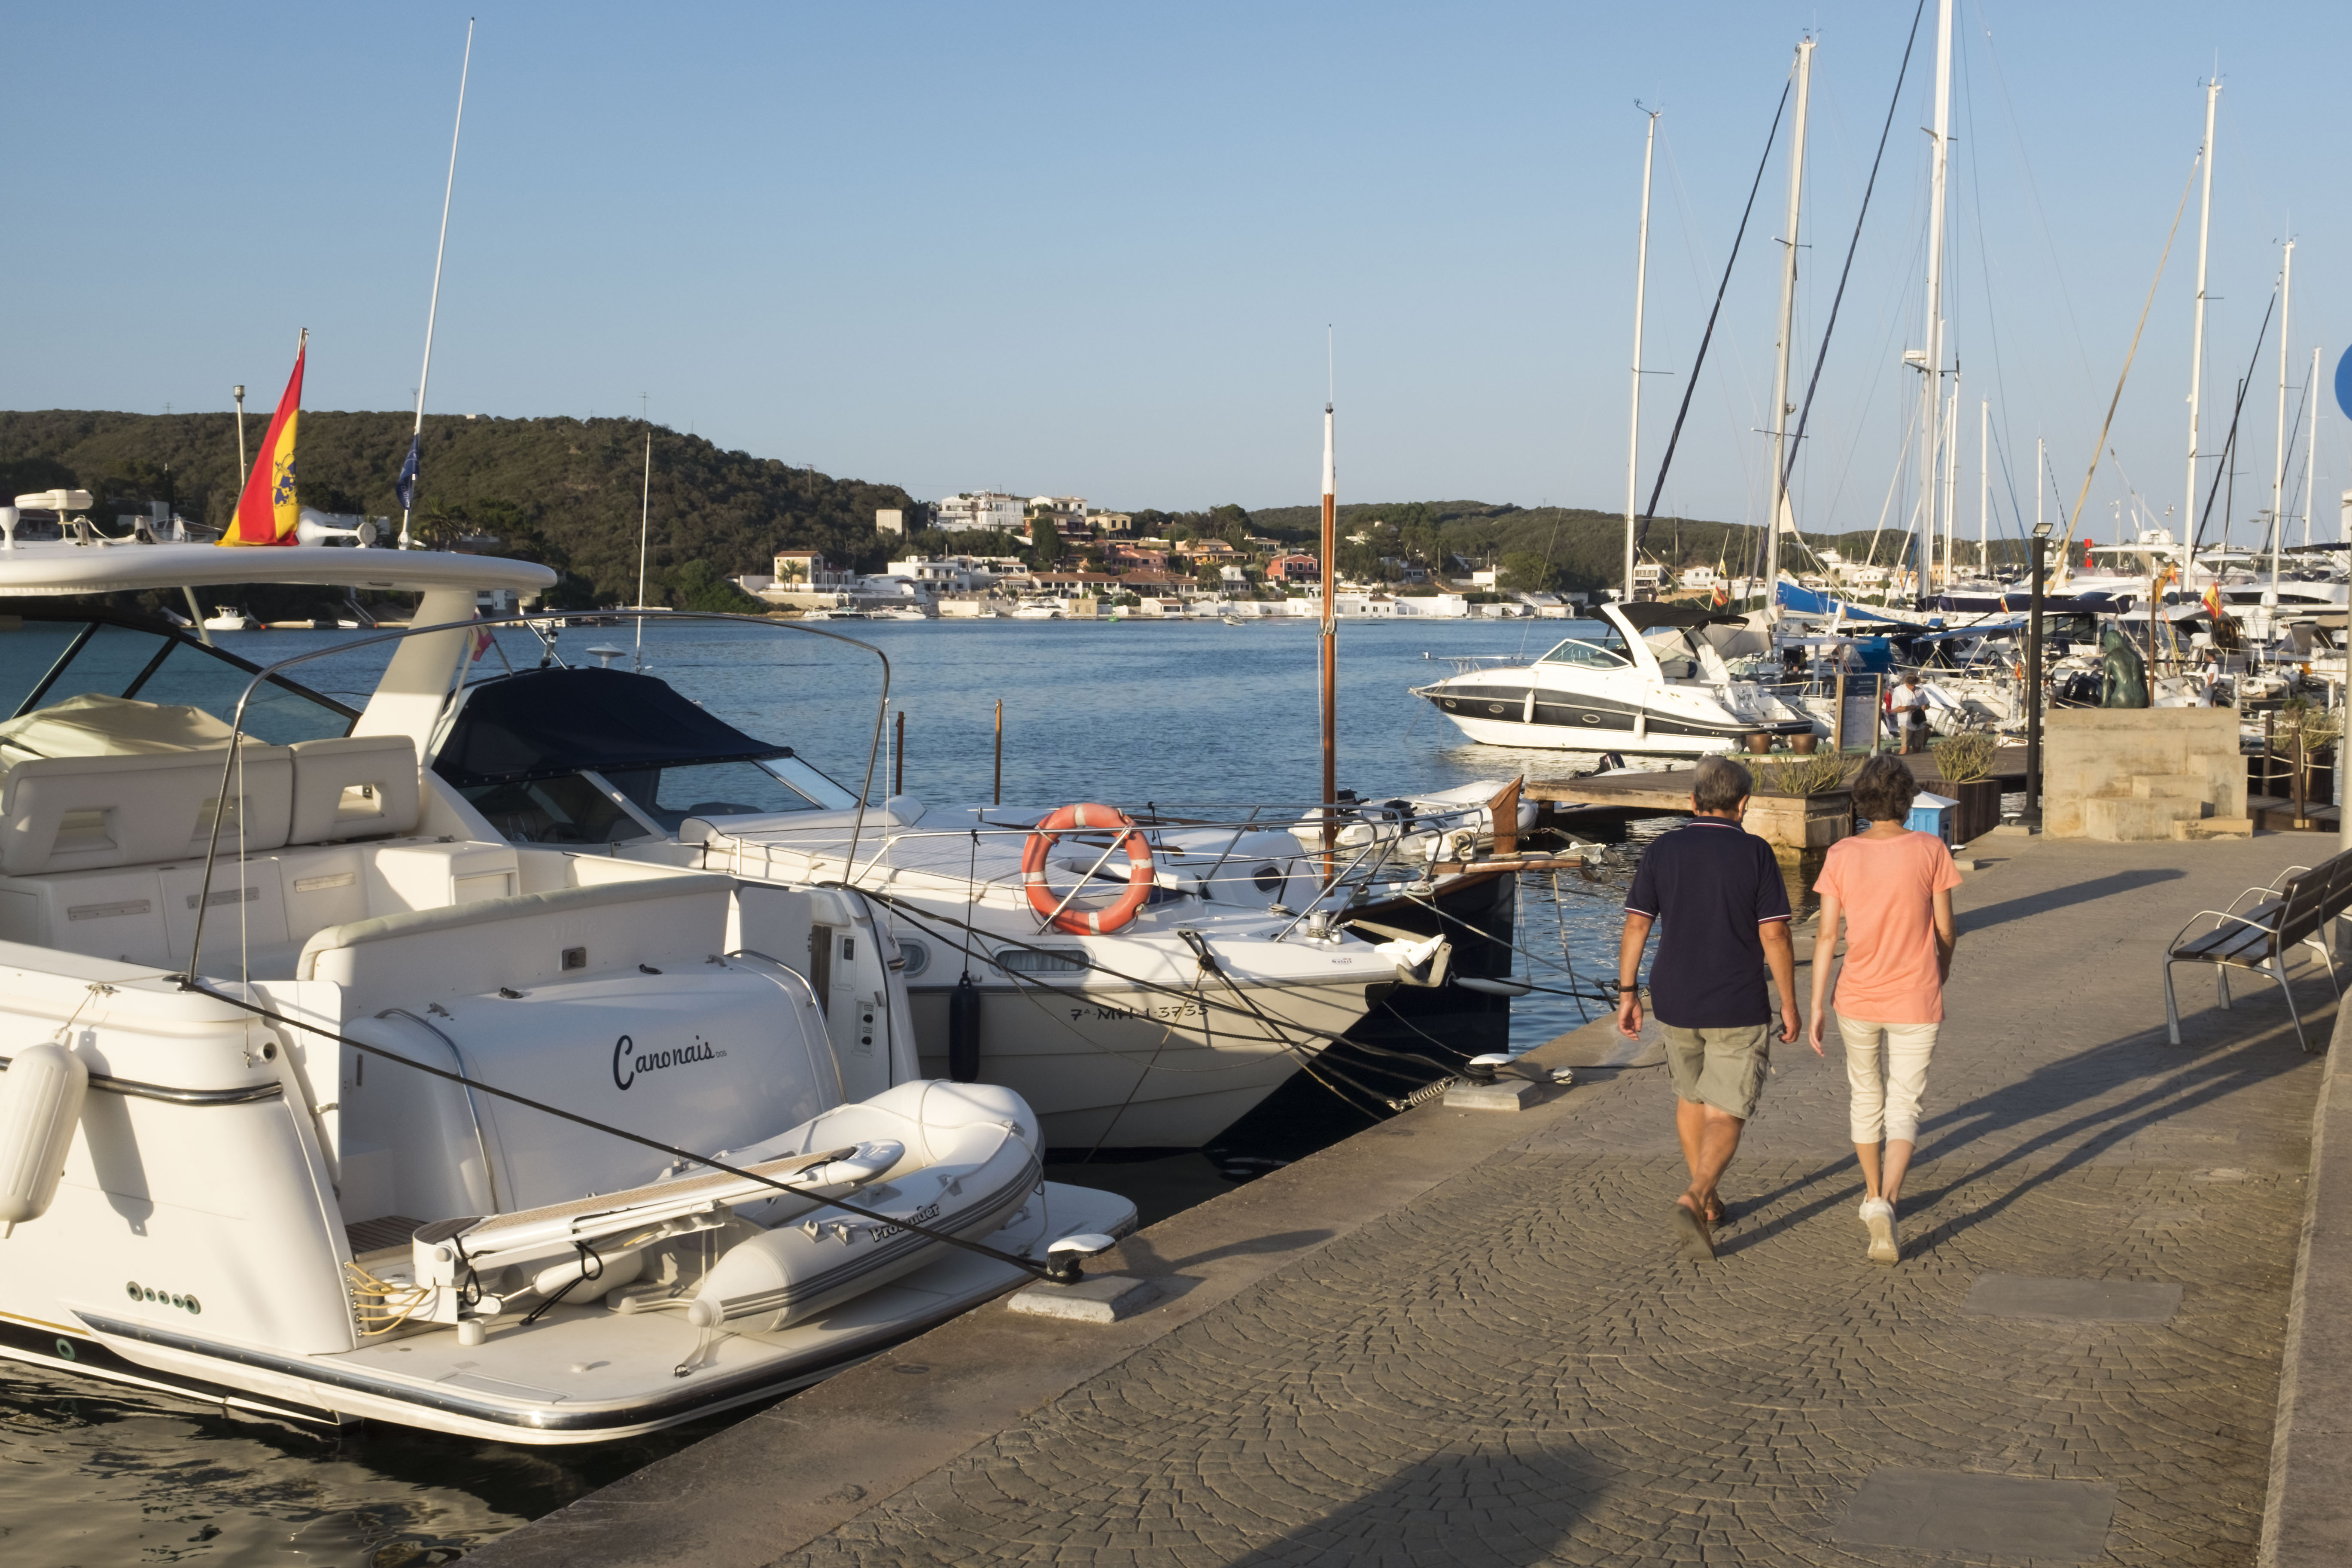 Tanit Ibiza Port will manage the mooring places for large boats at Punta da Cala Figuera in the port of Maó